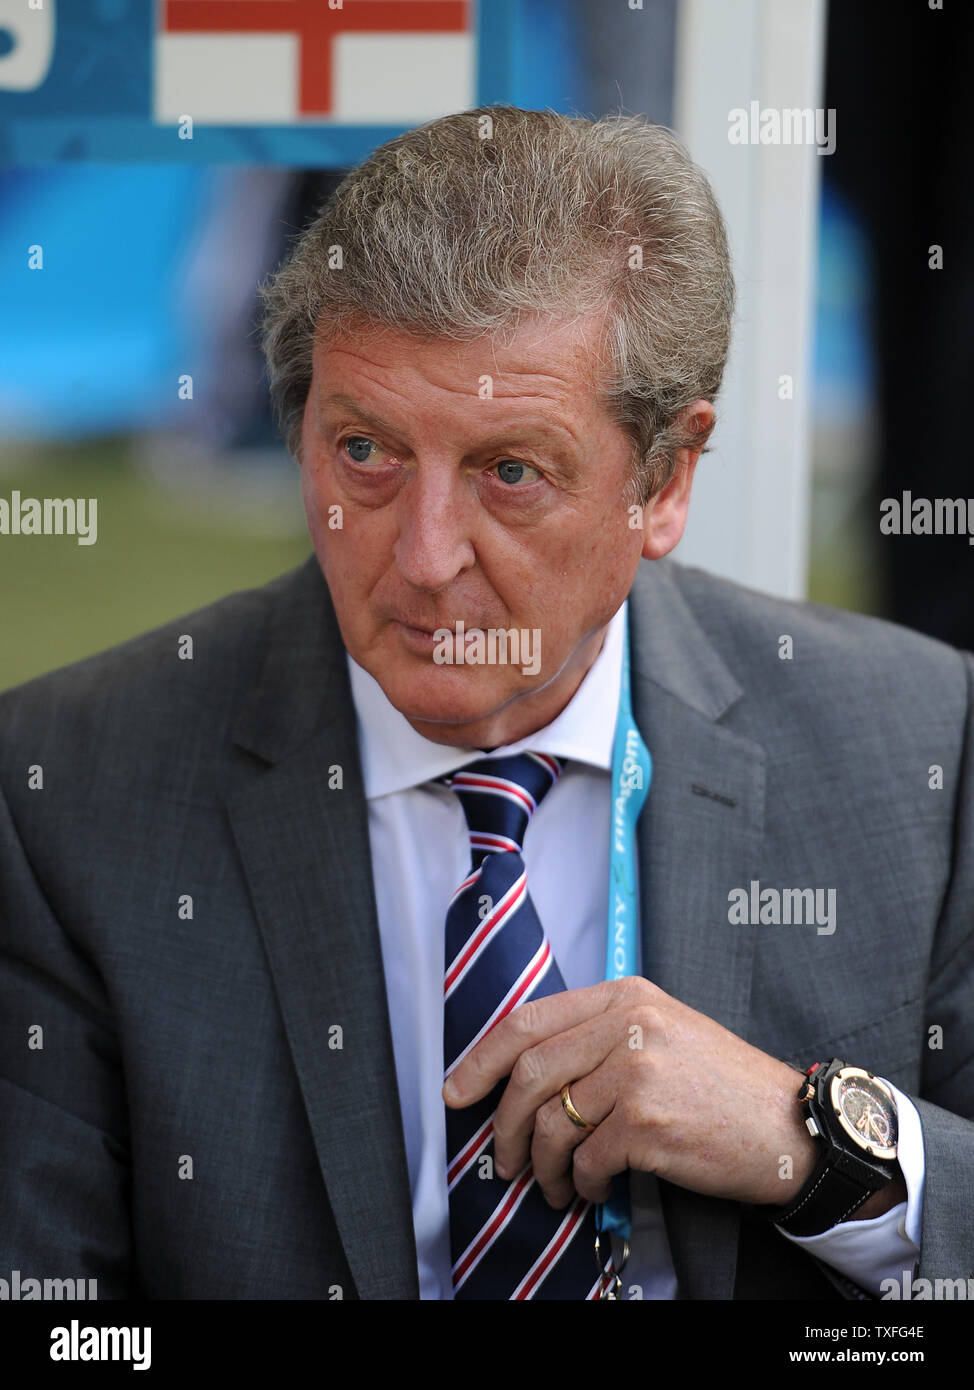 England manager Roy Hodgson looks on during the 2014 FIFA World Cup Group D match at the Estadio Mineirao in Belo Horizonte, Brazil on June 24, 2014. UPI/Chris Brunskill Stock Photo